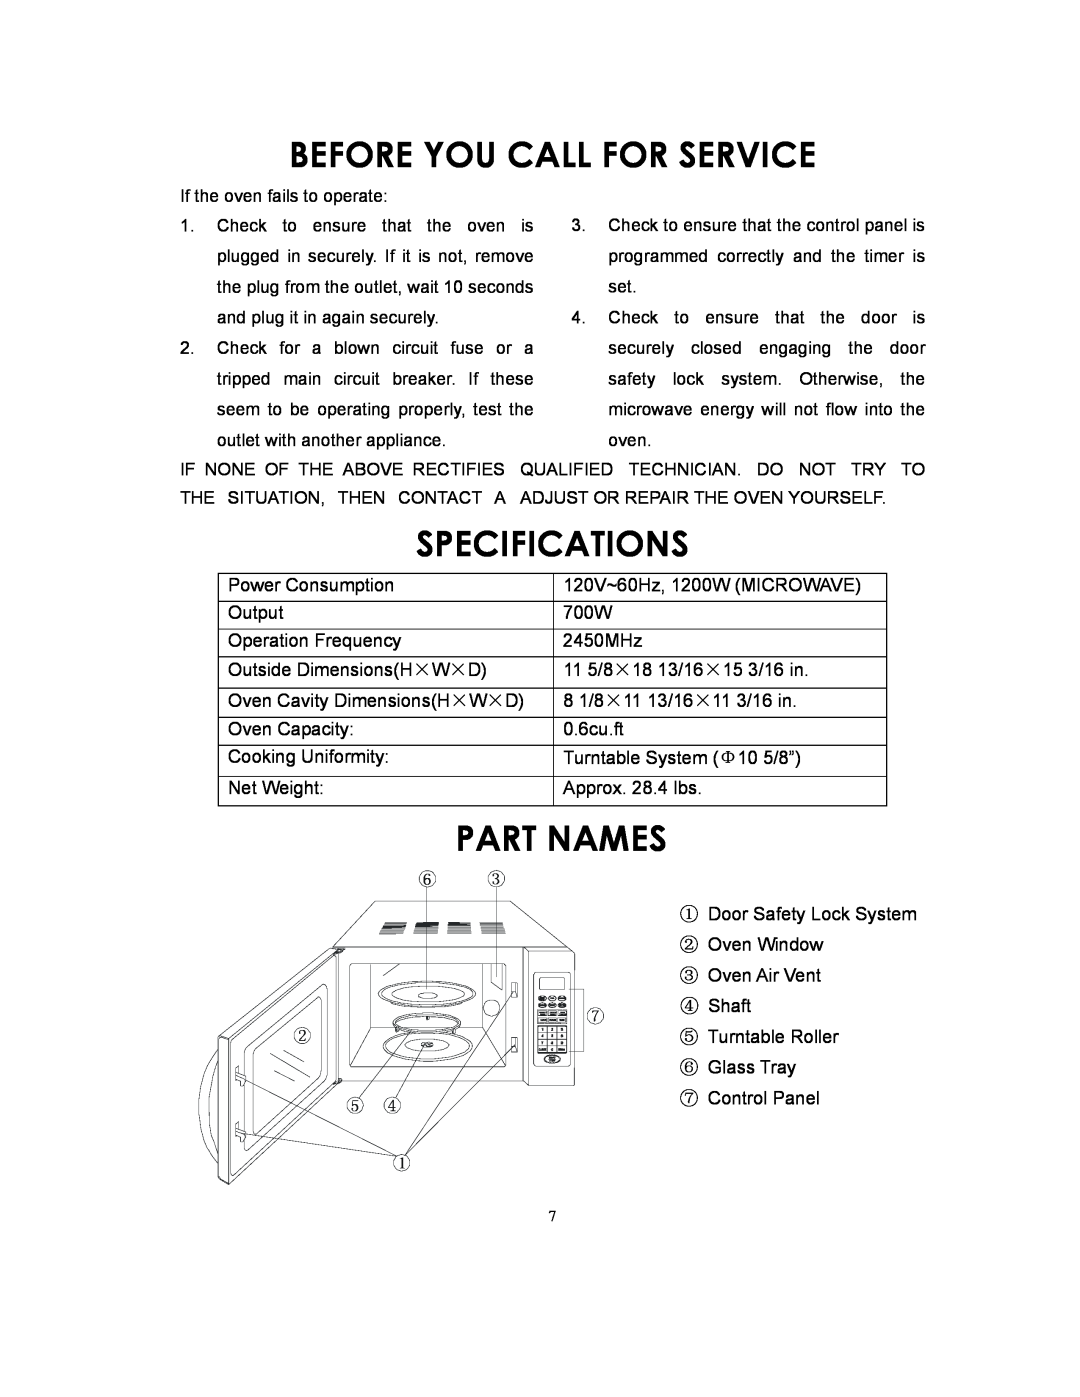 Sunbeam SMW729 owner manual Before You Call For Service, Specifications, Part Names 